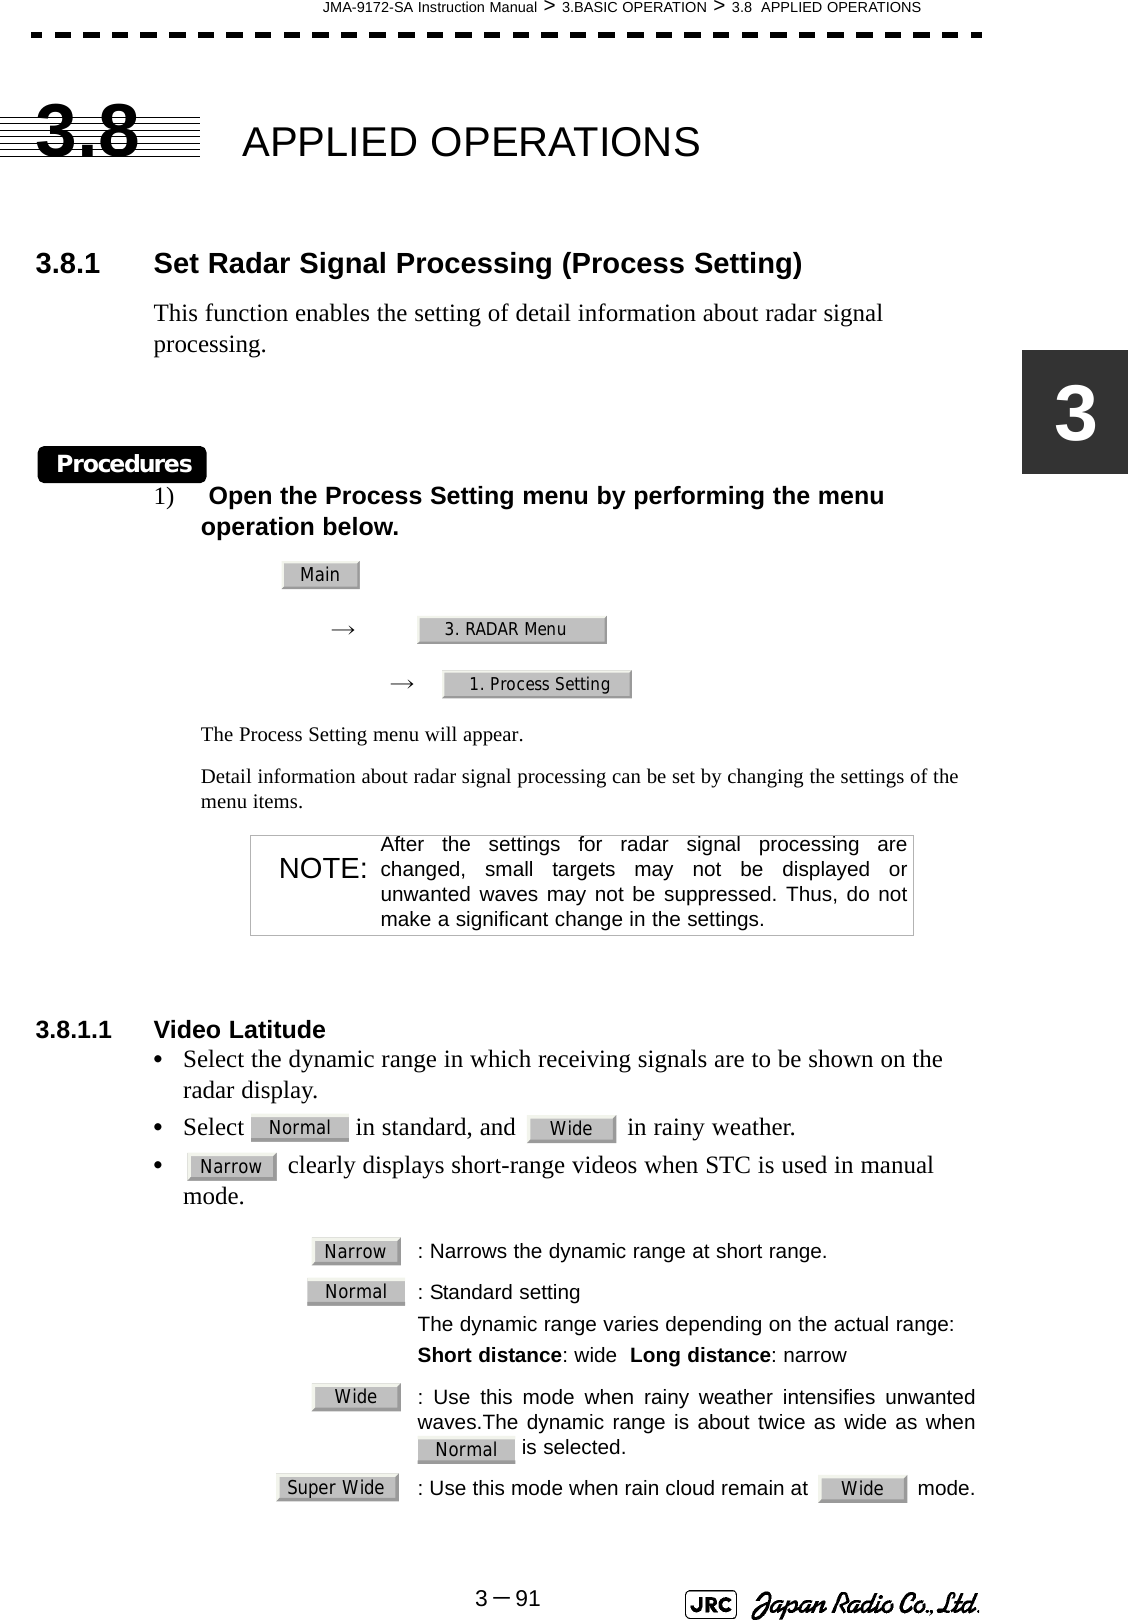 JMA-9172-SA Instruction Manual &gt; 3.BASIC OPERATION &gt; 3.8  APPLIED OPERATIONS3－9133.8 APPLIED OPERATIONS3.8.1 Set Radar Signal Processing (Process Setting)This function enables the setting of detail information about radar signal processing.Procedures1)  Open the Process Setting menu by performing the menu operation below.→　→　The Process Setting menu will appear.Detail information about radar signal processing can be set by changing the settings of the menu items.3.8.1.1 Video Latitude•Select the dynamic range in which receiving signals are to be shown on the radar display.•Select   in standard, and   in rainy weather.• clearly displays short-range videos when STC is used in manual mode.  NOTE: After the settings for radar signal processing arechanged, small targets may not be displayed orunwanted waves may not be suppressed. Thus, do notmake a significant change in the settings.  : Narrows the dynamic range at short range.  : Standard settingThe dynamic range varies depending on the actual range:Short distance: wide  Long distance: narrow  : Use this mode when rainy weather intensifies unwantedwaves.The dynamic range is about twice as wide as when is selected.  : Use this mode when rain cloud remain at   mode.Main3. RADAR Menu1. Process SettingNormal WideNarrowNarrowNormalWideNormalSuper Wide Wide